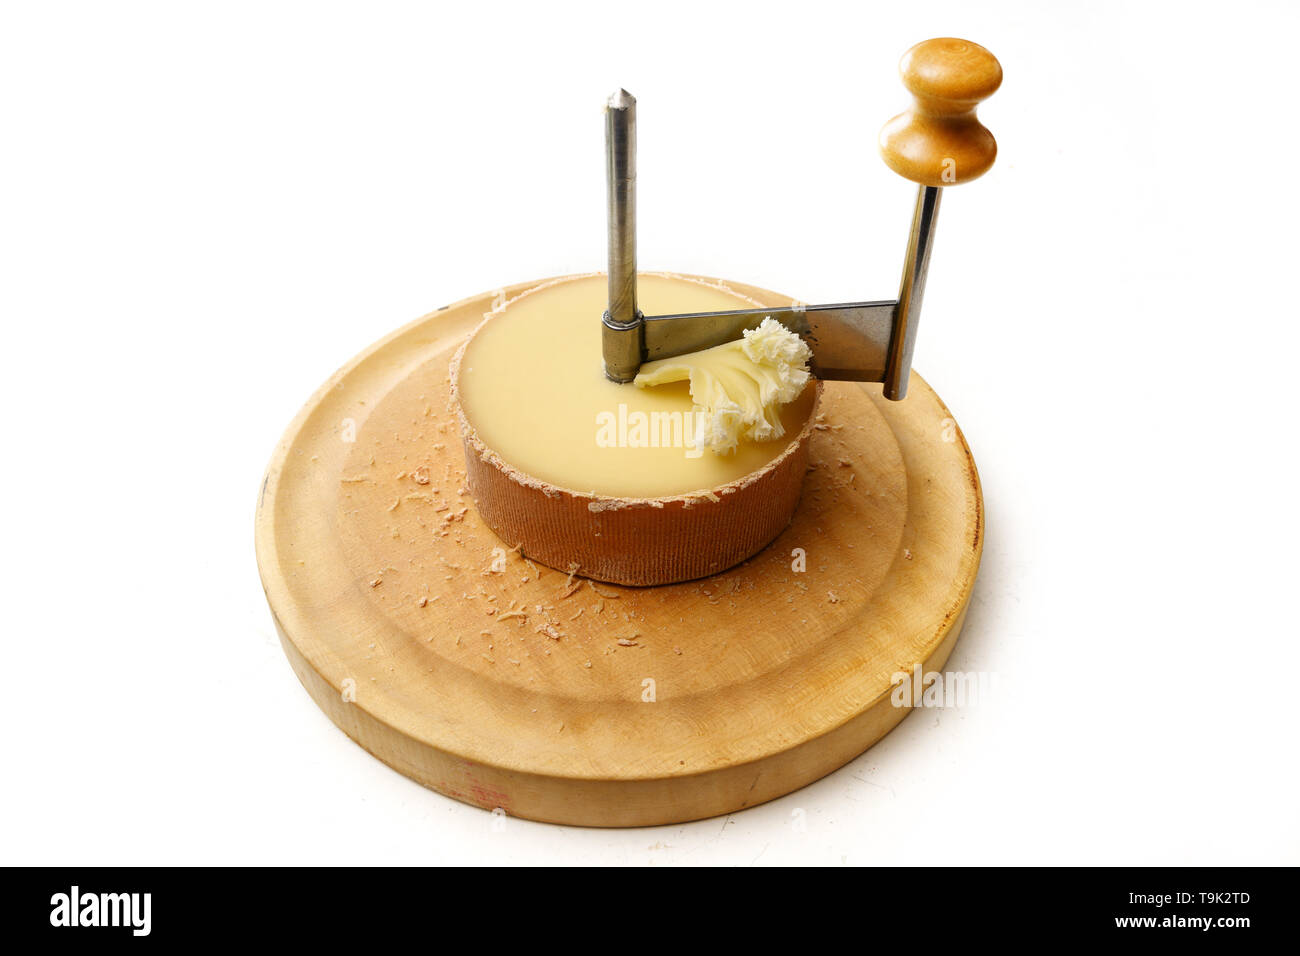 https://c8.alamy.com/comp/T9K2TD/tte-de-moine-or-monks-head-cheese-in-a-girolle-a-special-knife-to-cut-thin-shavings-in-form-of-rosettes-isolated-on-a-white-background-selected-f-T9K2TD.jpg